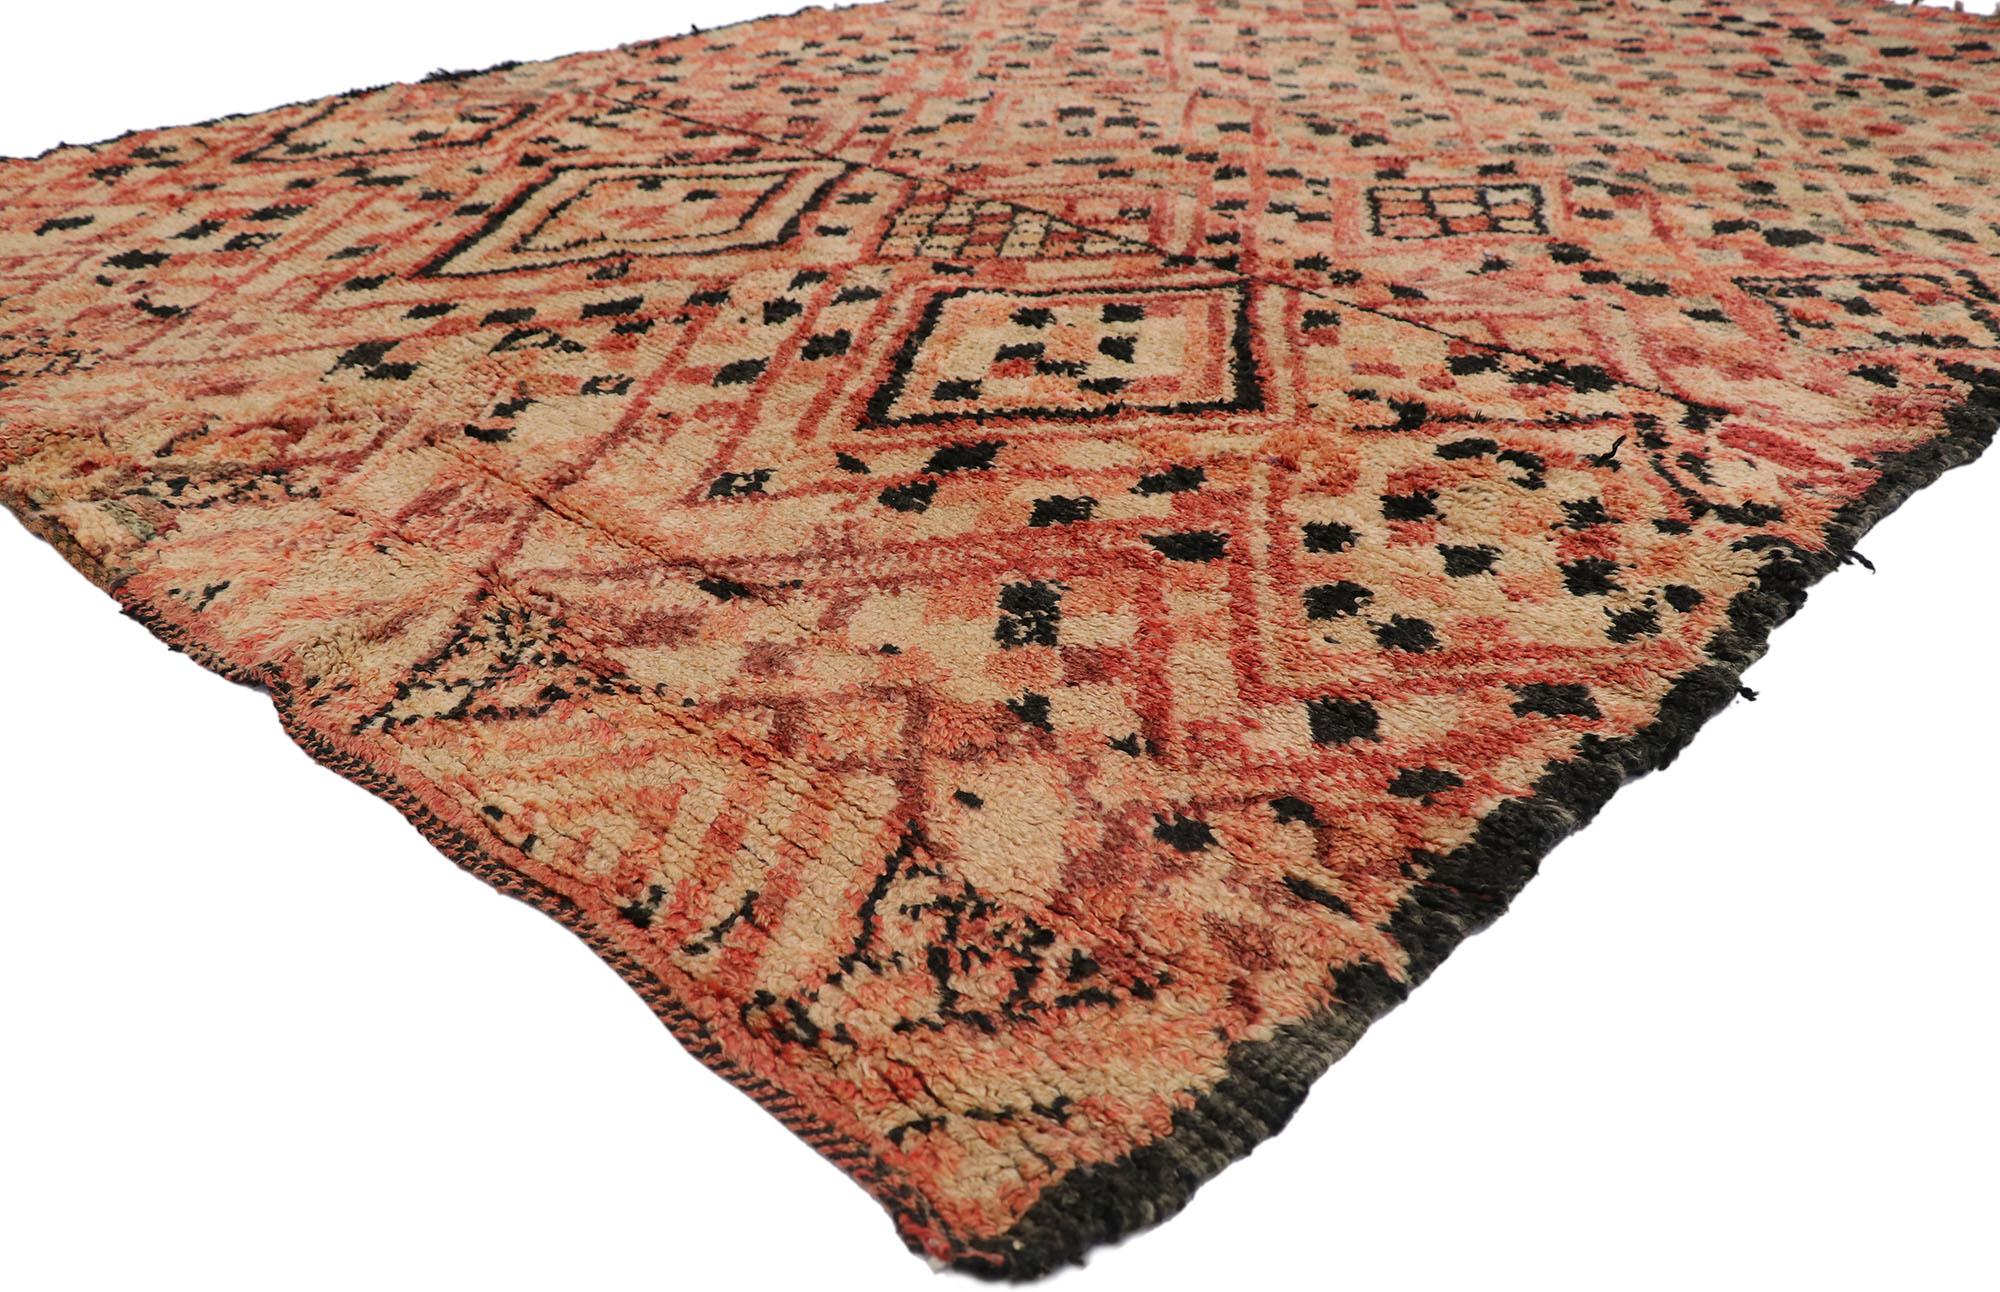 21265 Vintage Berber Moroccan Boujad rug with Bohemian Style 06'08 x 10'05. Warm and inviting, this hand-knotted wool vintage Berber Boujad Moroccan rug is a captivating vision of woven beauty. The eye-catching diamond pattern and faded colors woven